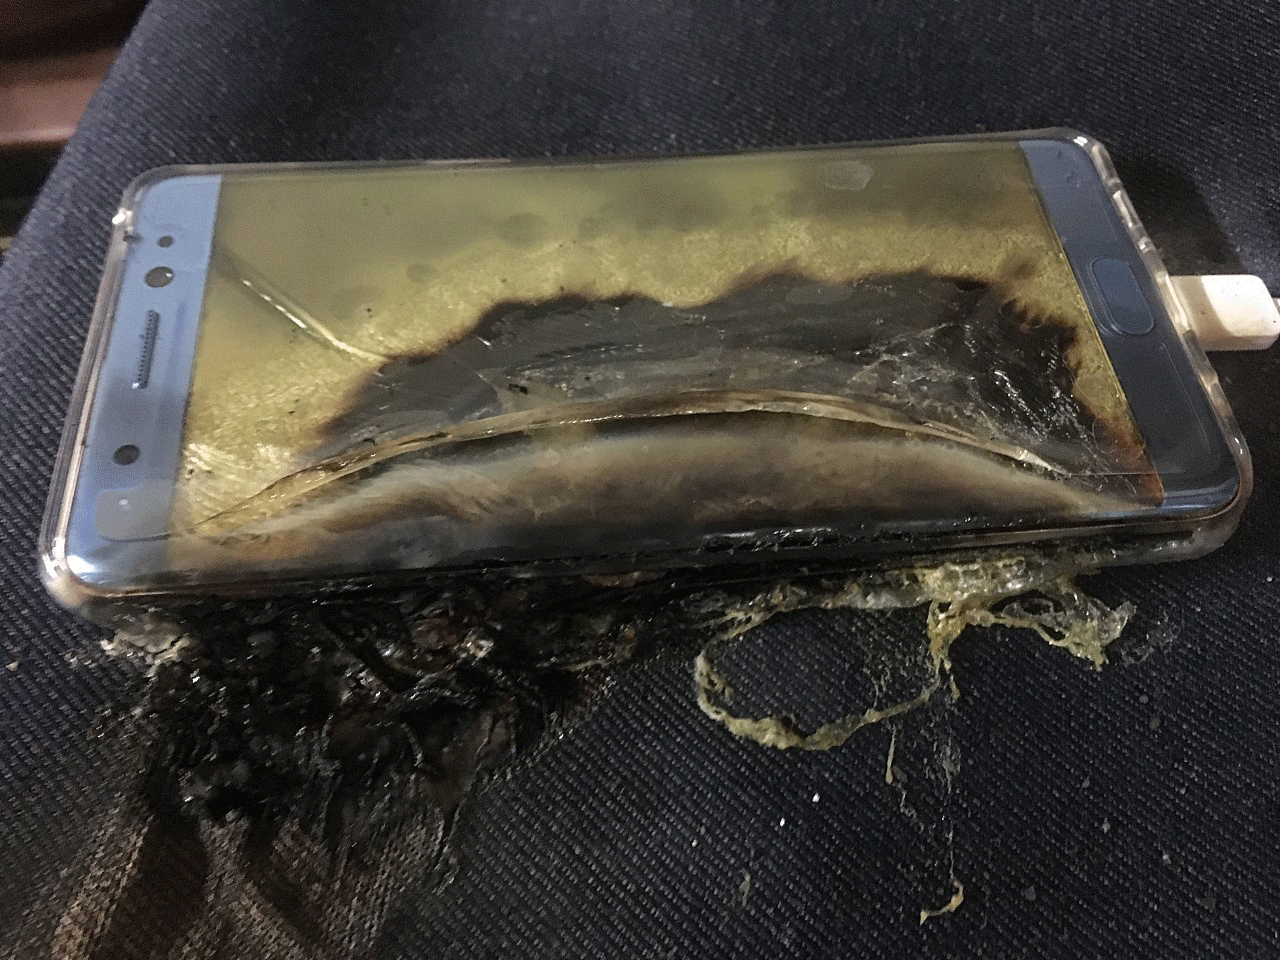 Read more

Samsung Galaxy Note 7 banned from all Lufthansa flights